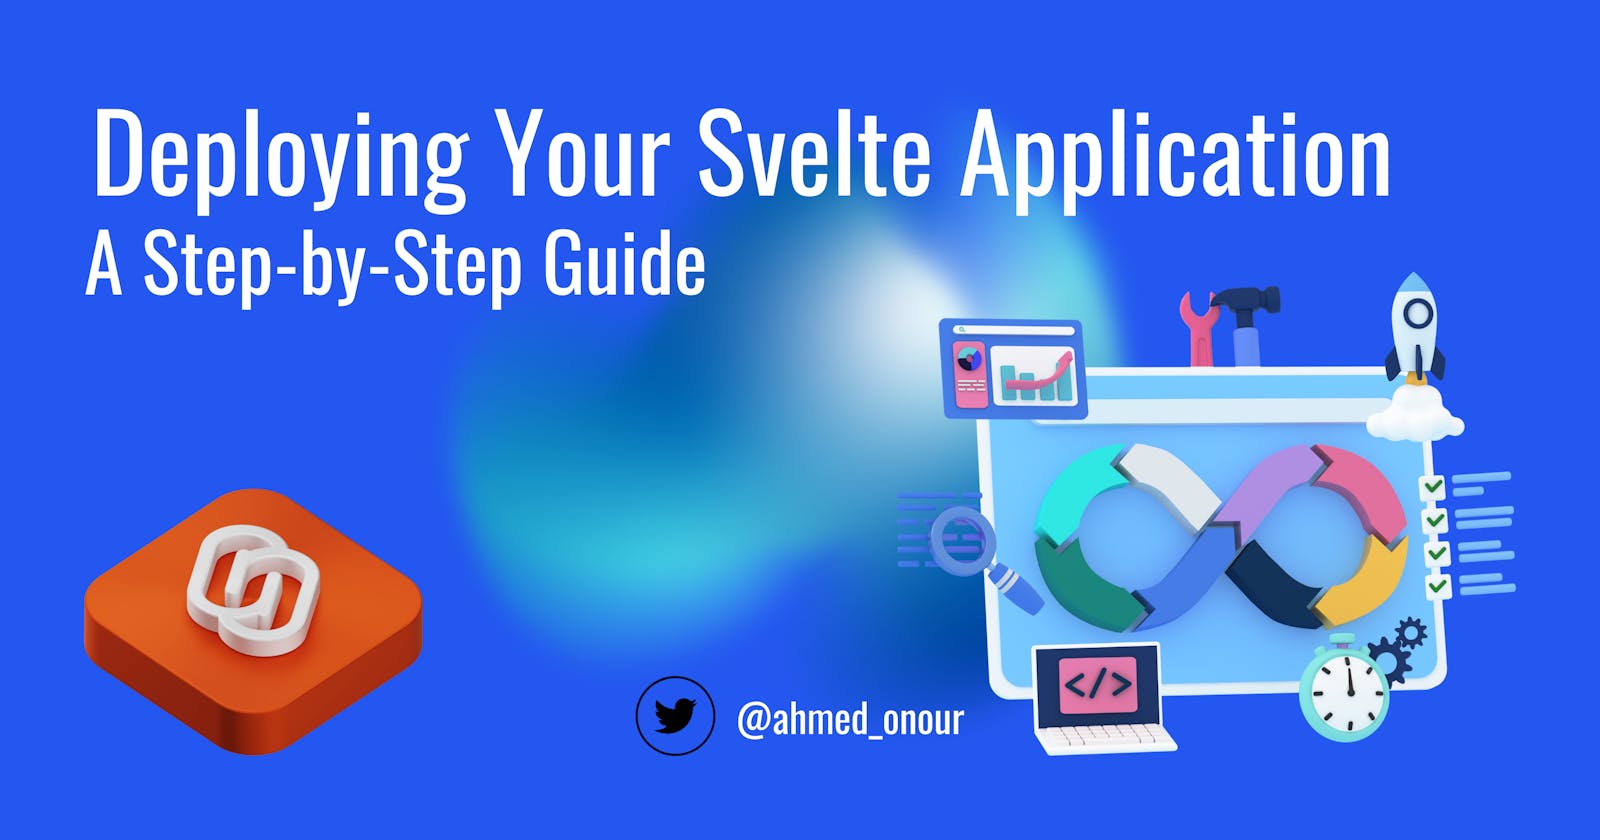 Deploying Your Svelte Application: A Step-by-Step Guide